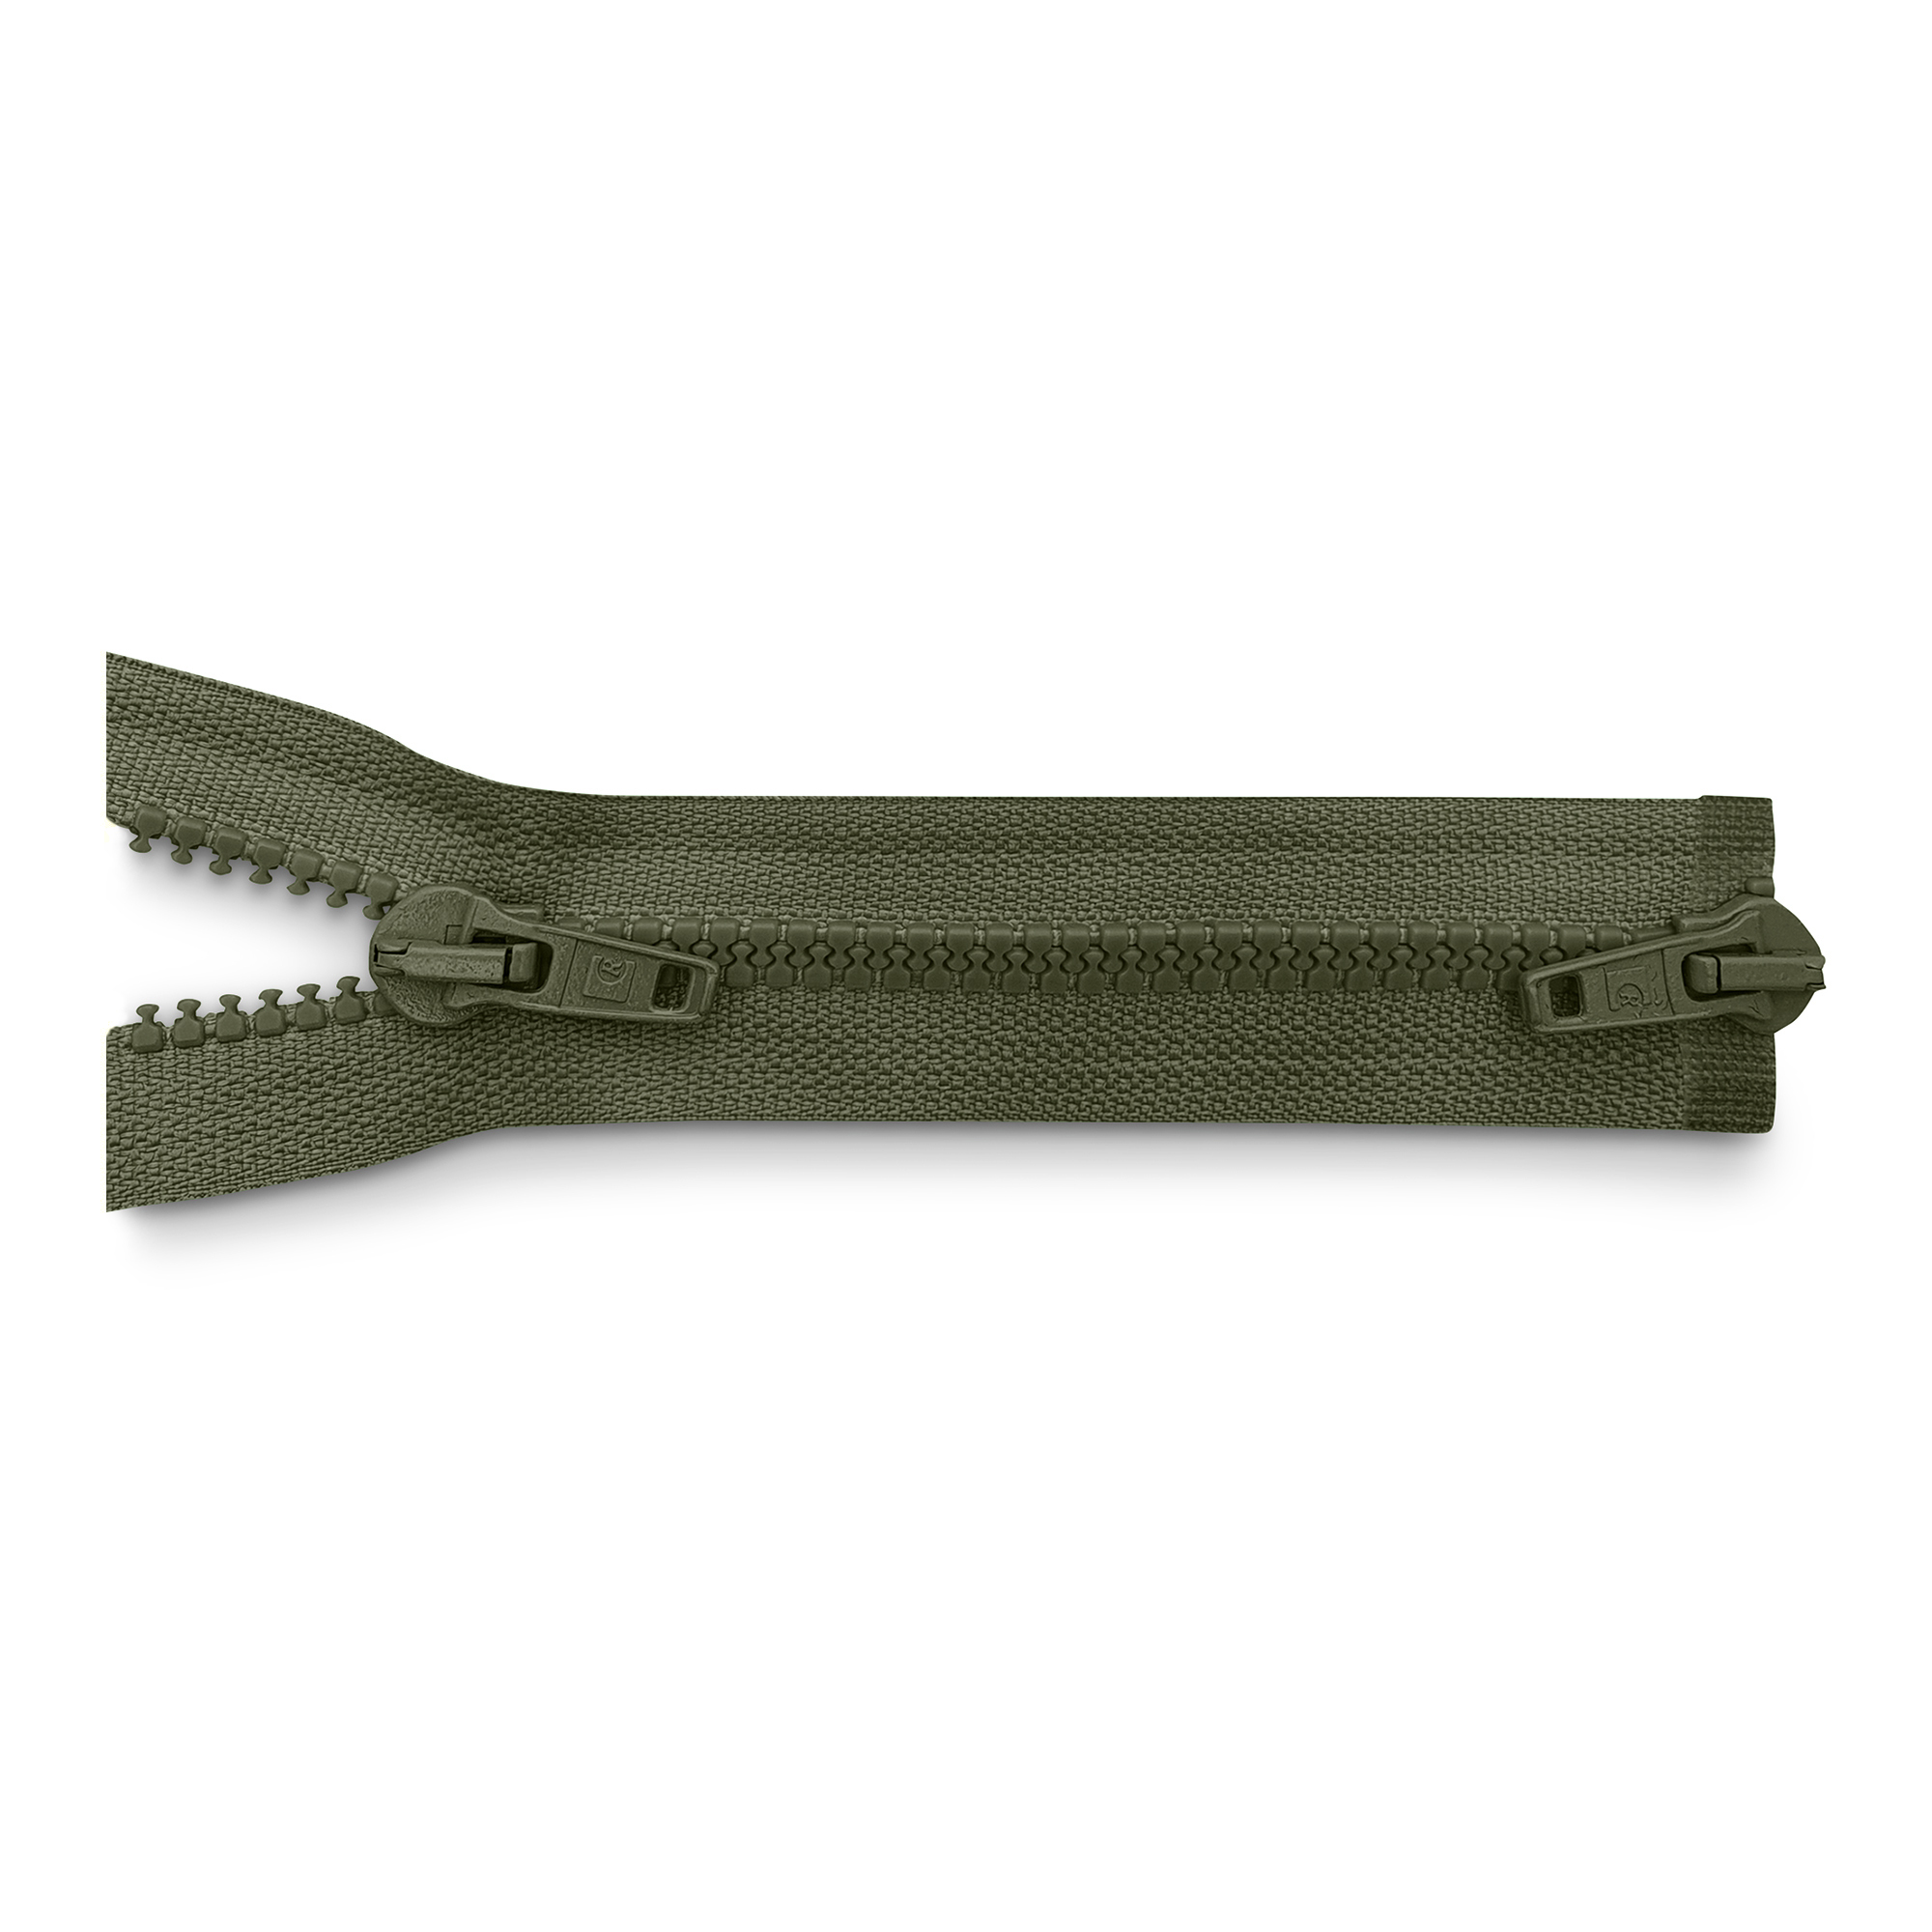 zipper 80cm,   divisible, 2way, molded plastic, wide, army olive